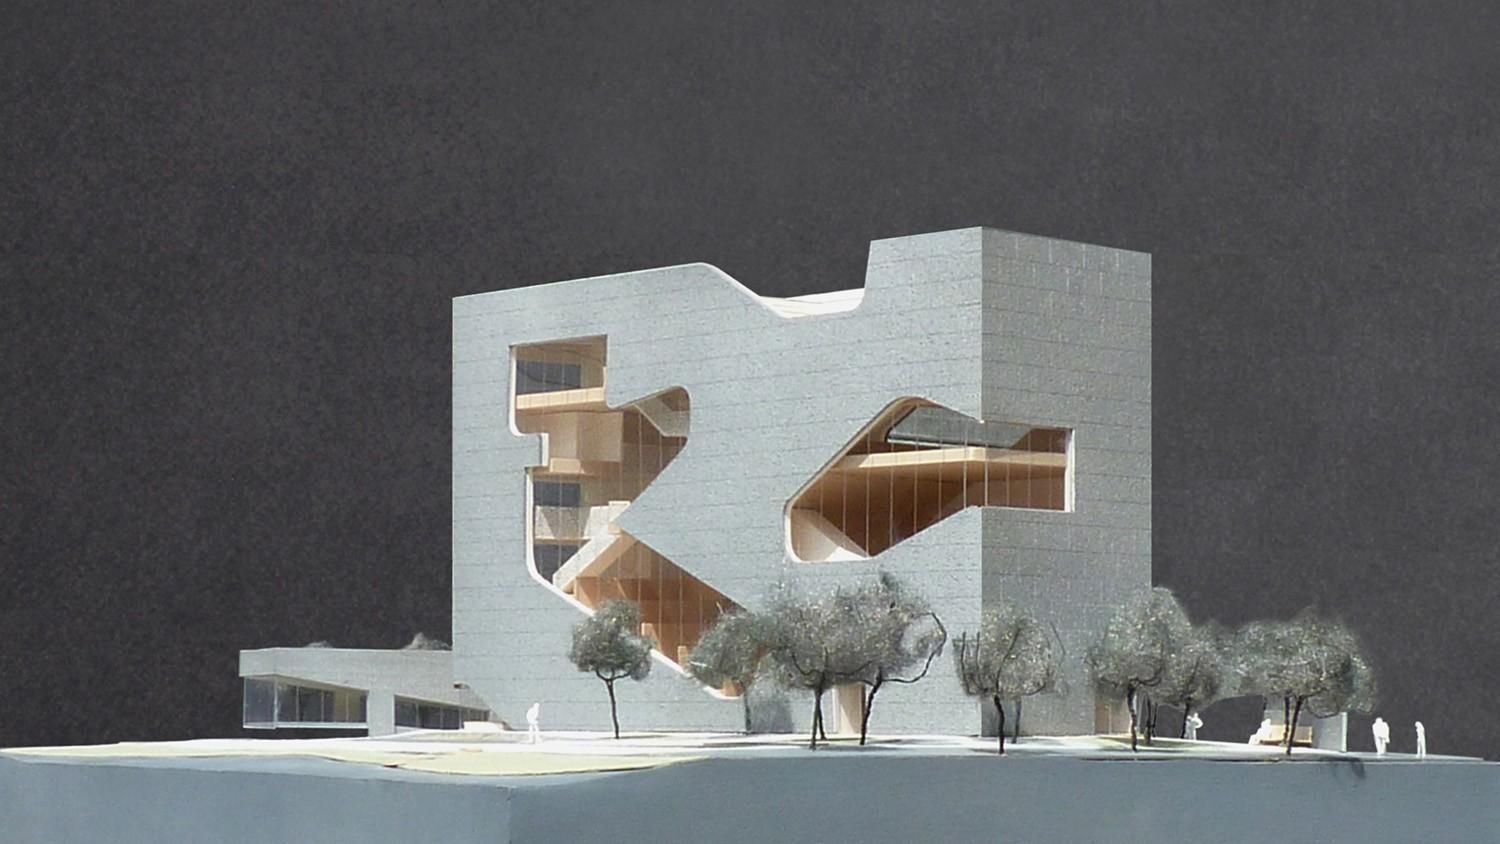 Steven Holl Architects’ library and park to bridge the generation gap in New York City